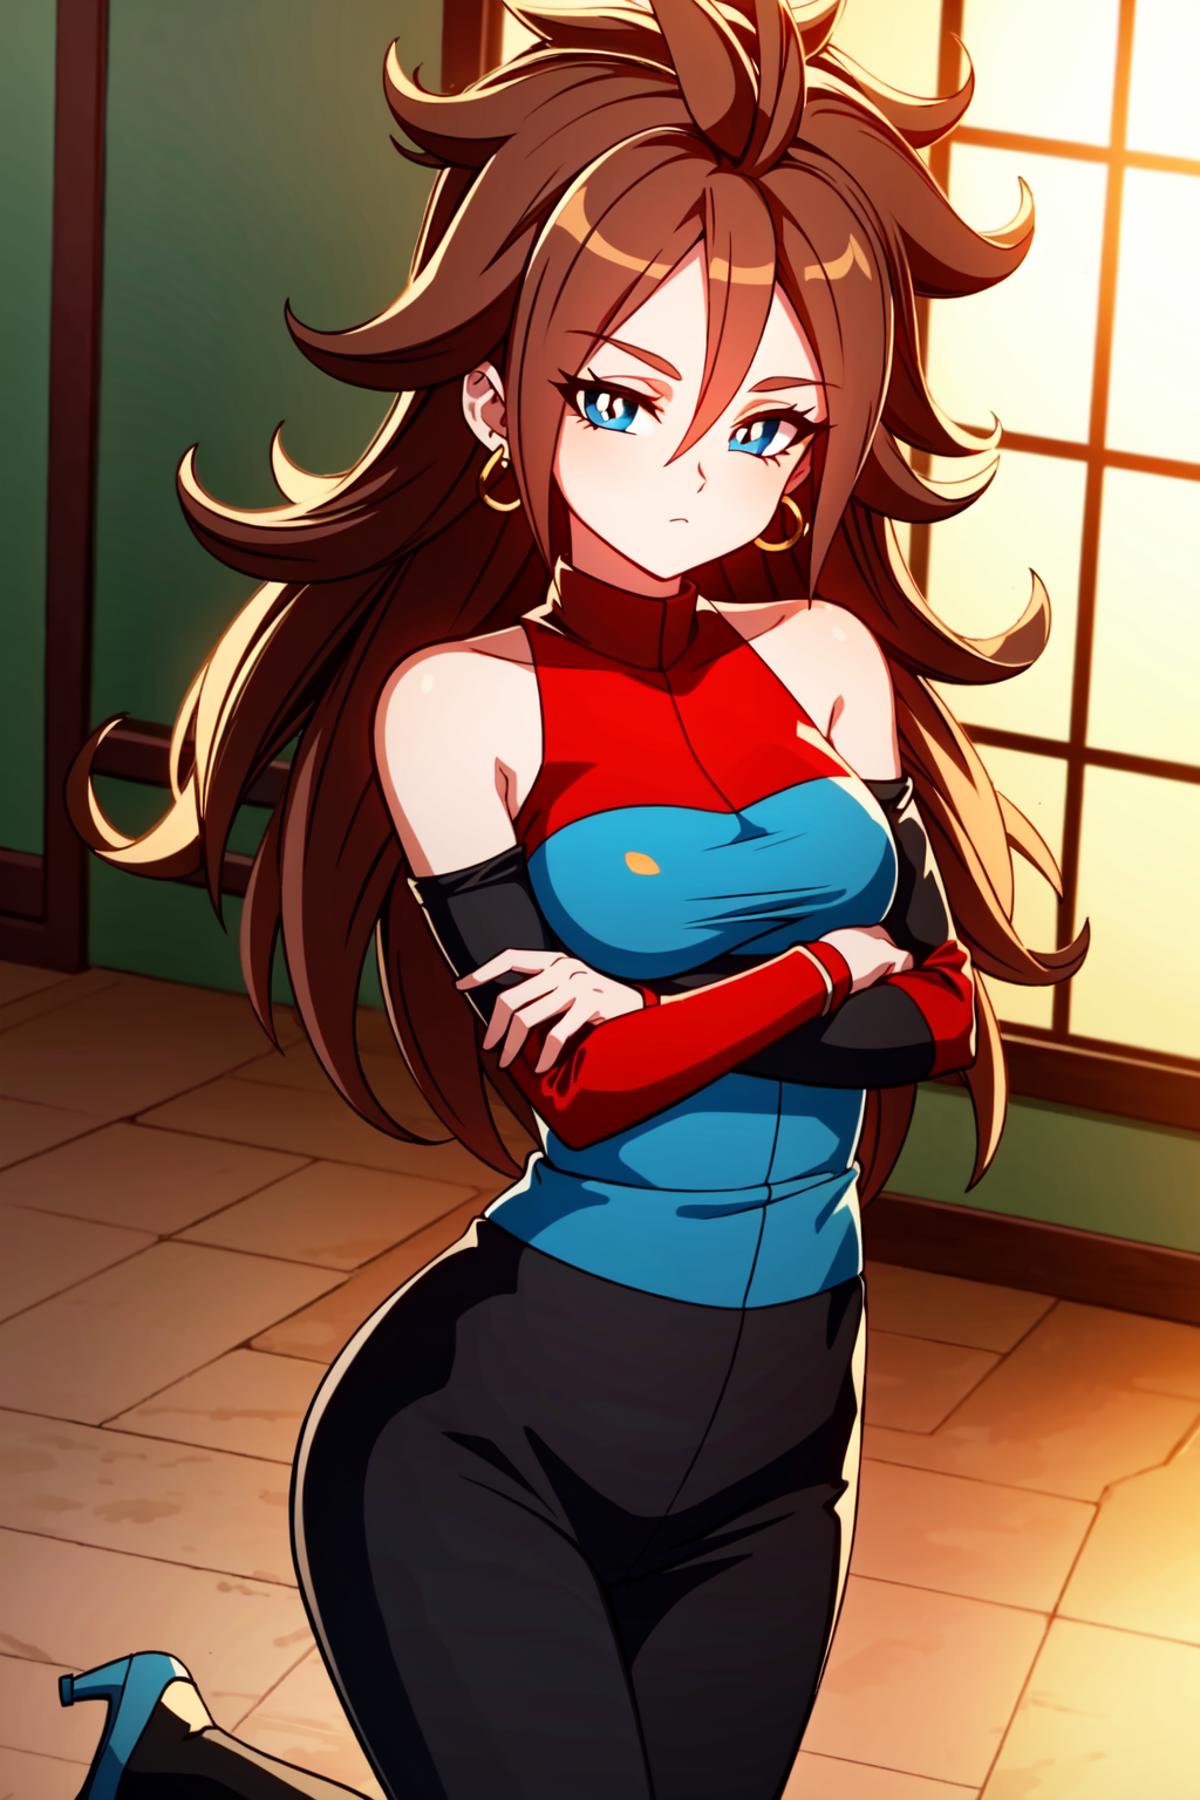 Android 21 x Dragon Ball FighterZ image by OG_Turles